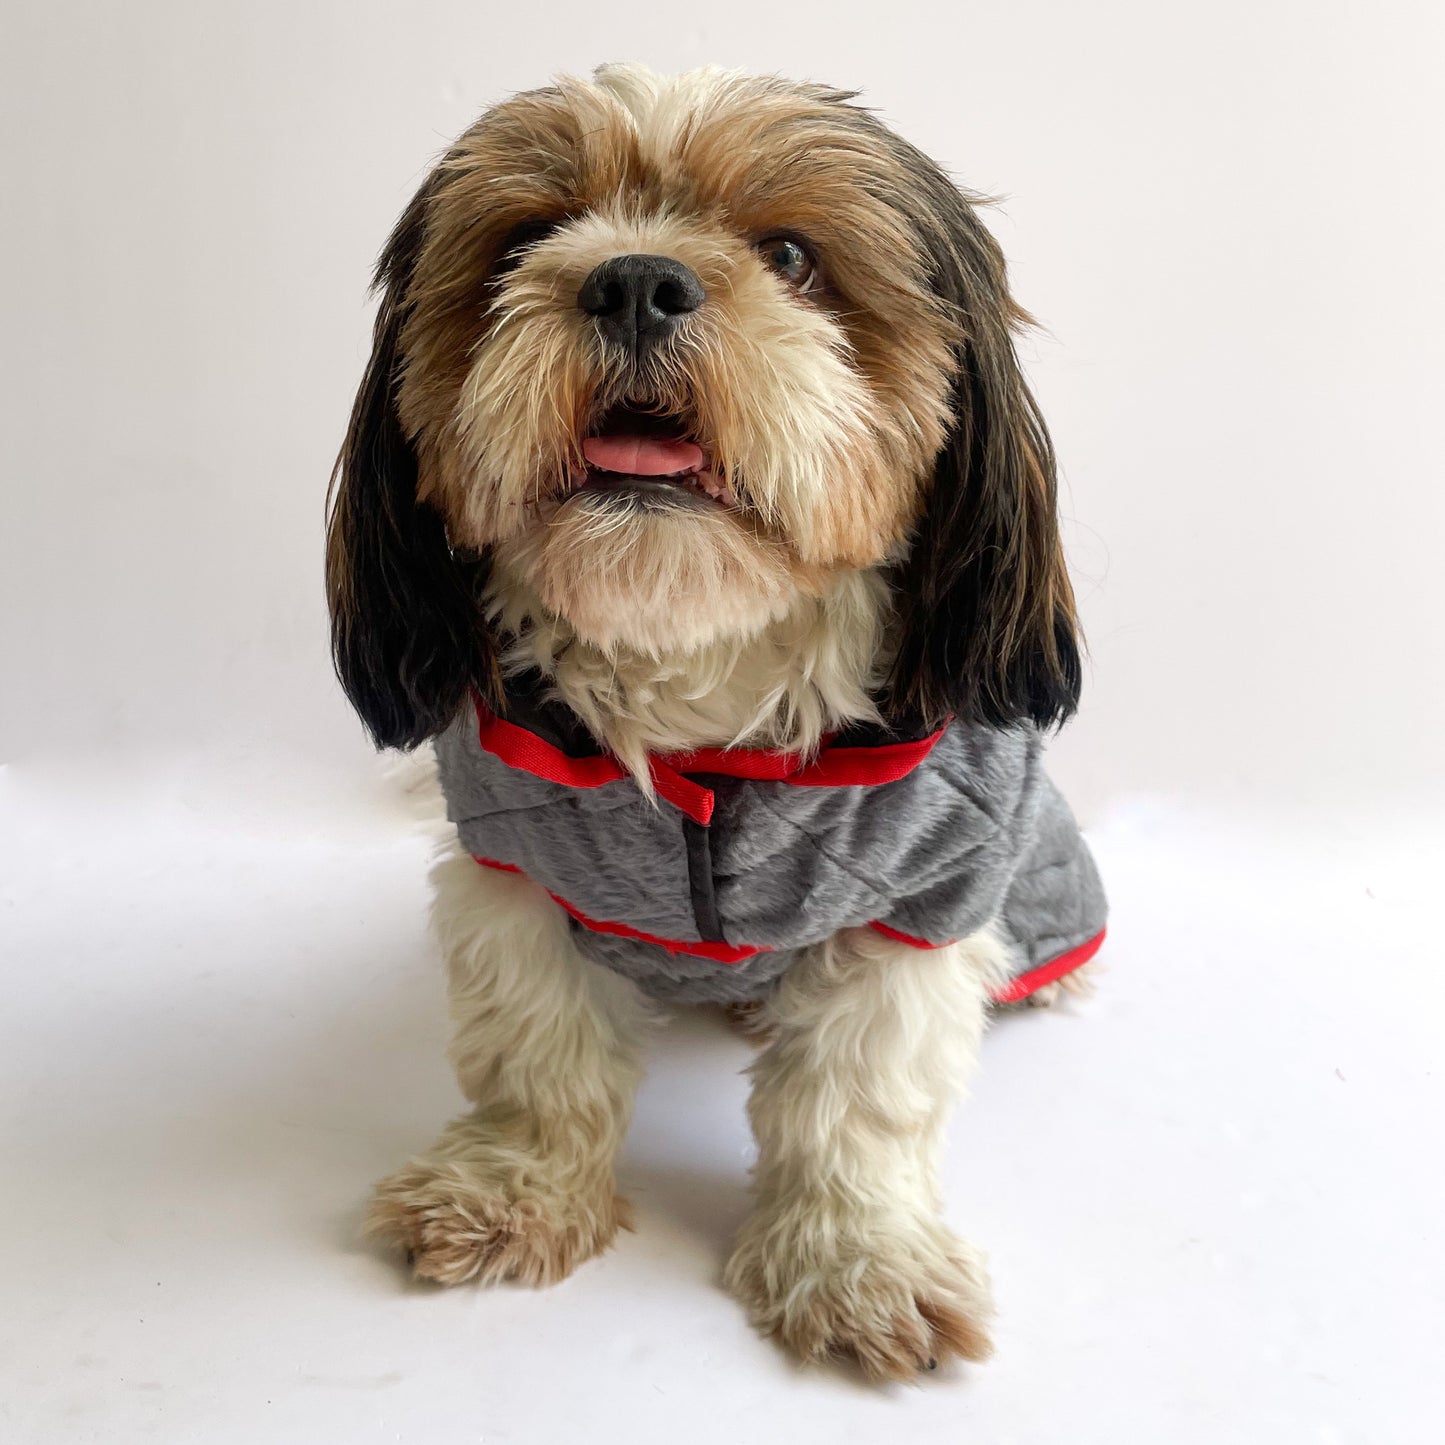 Pawgy Pets Reversible Quilted Jacket (Grey & Black) for Dogs & Cats